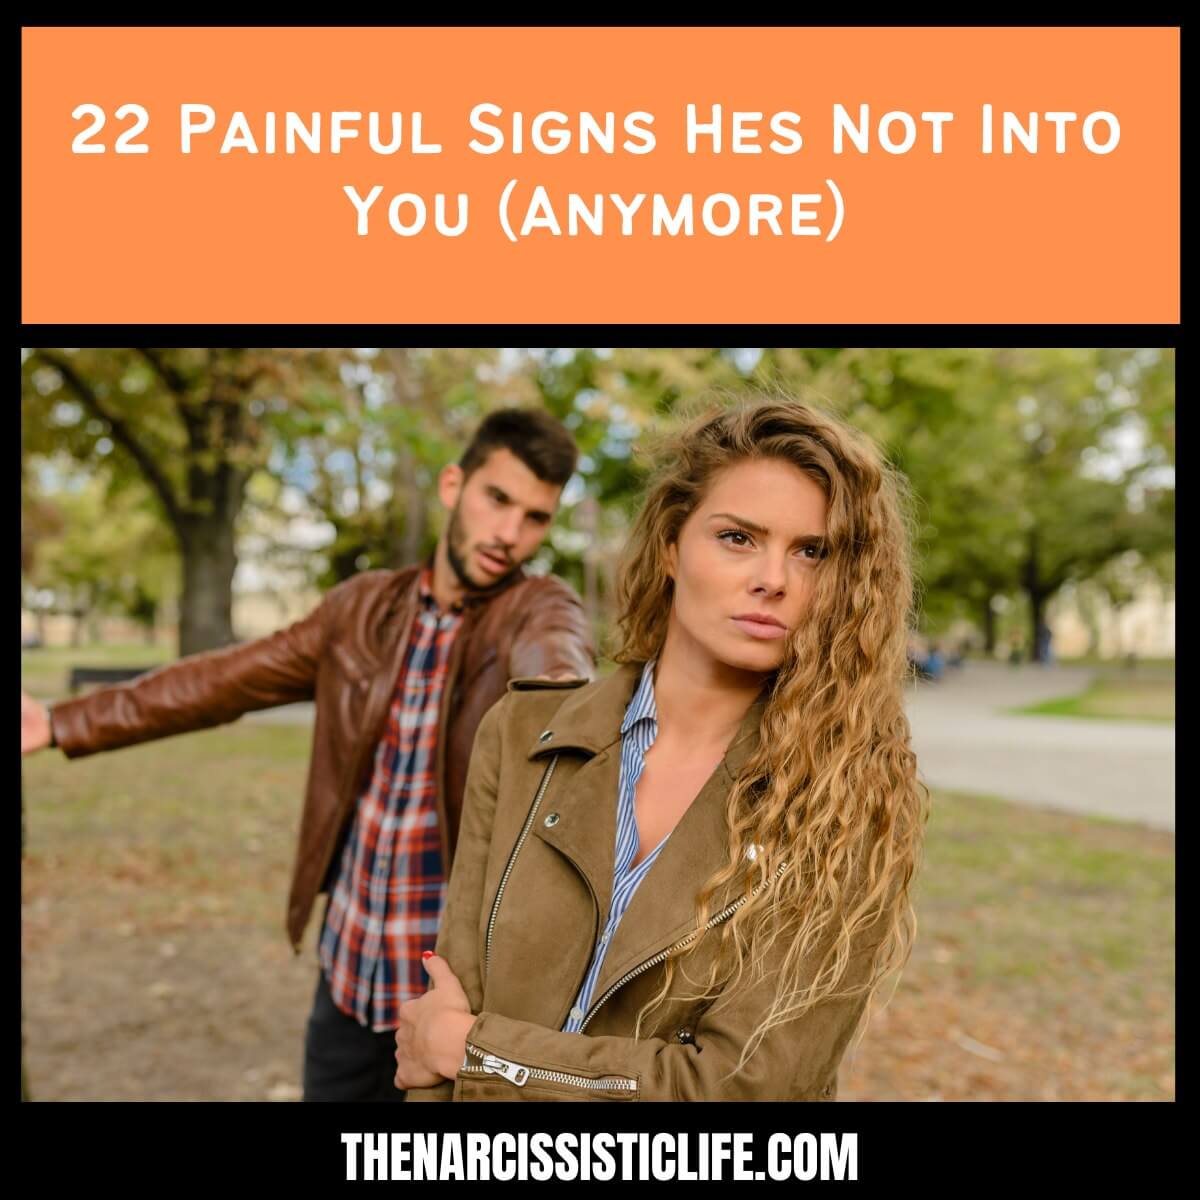 22 Painful Signs Hes Not Into You (Anymore)